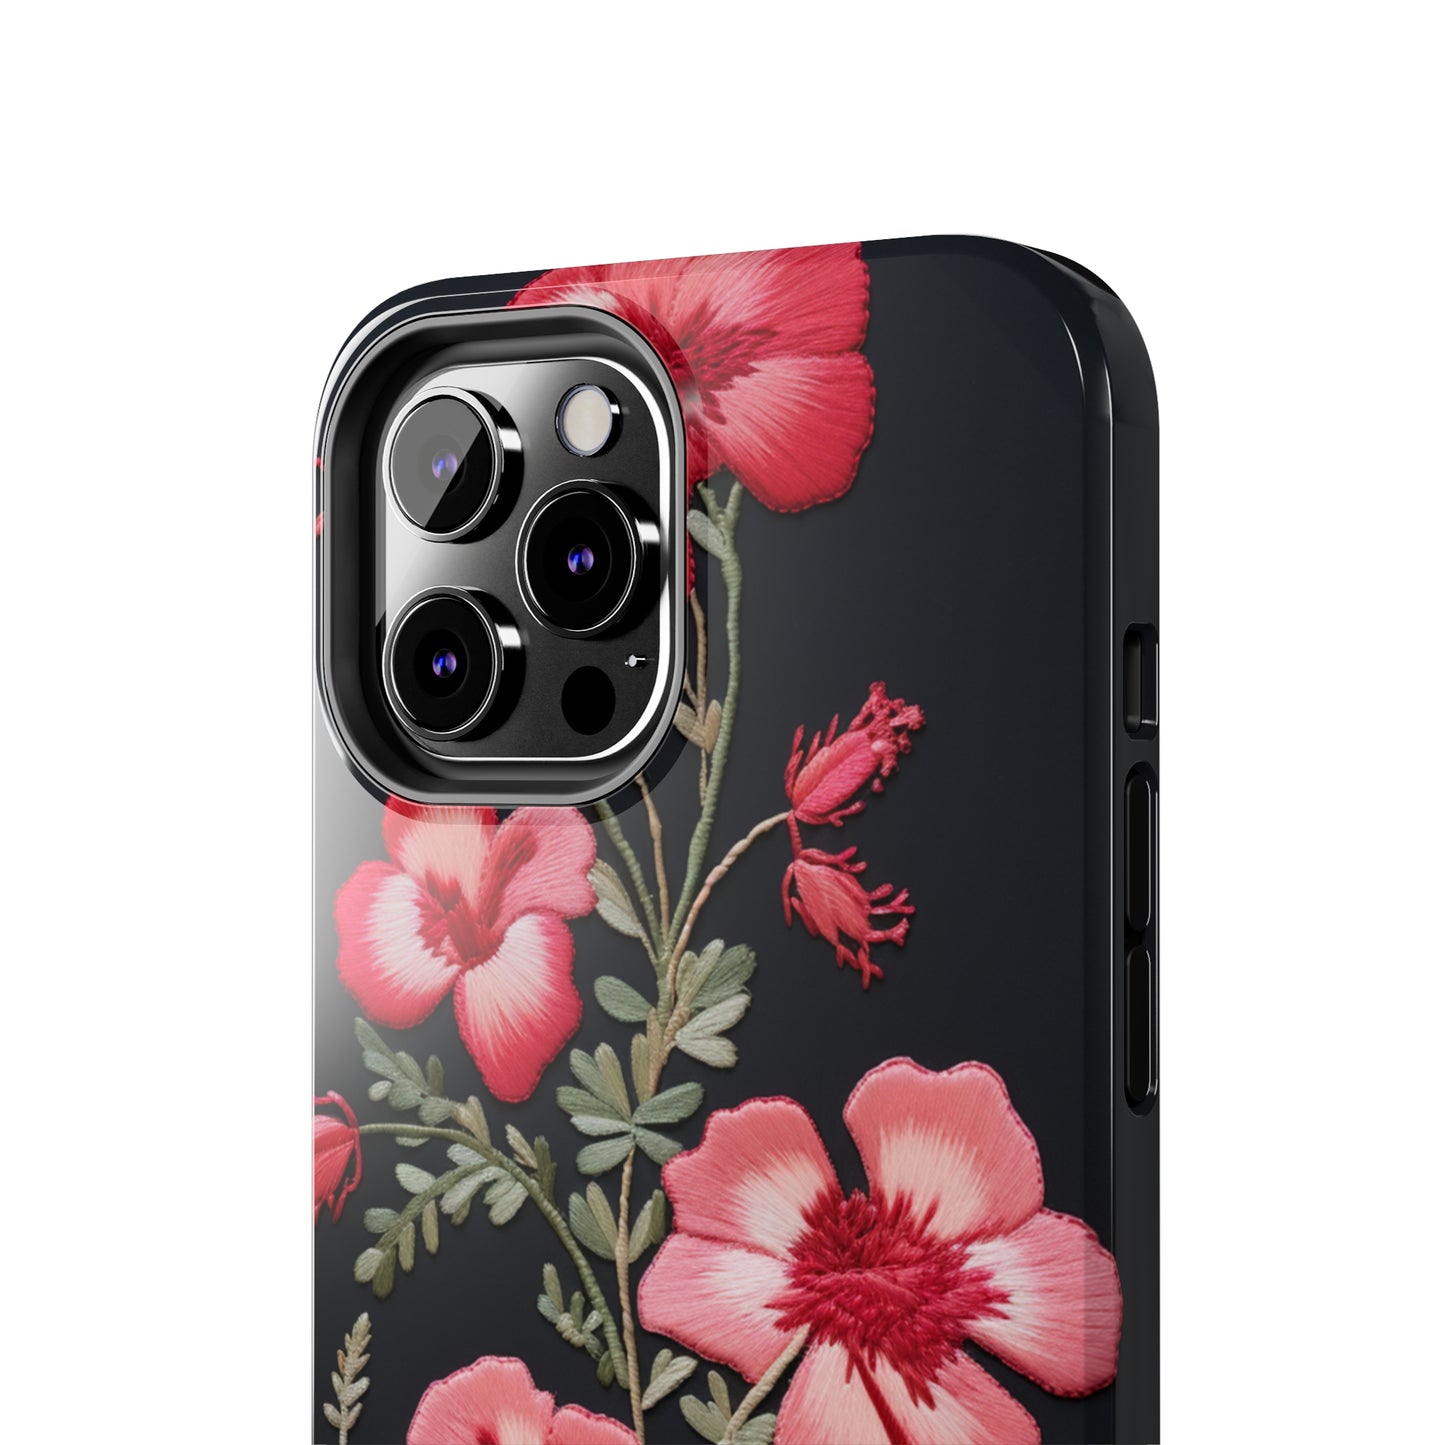 New Floral Embroidery iPhone Case | Embrace the Beauty of Intricate Stitching